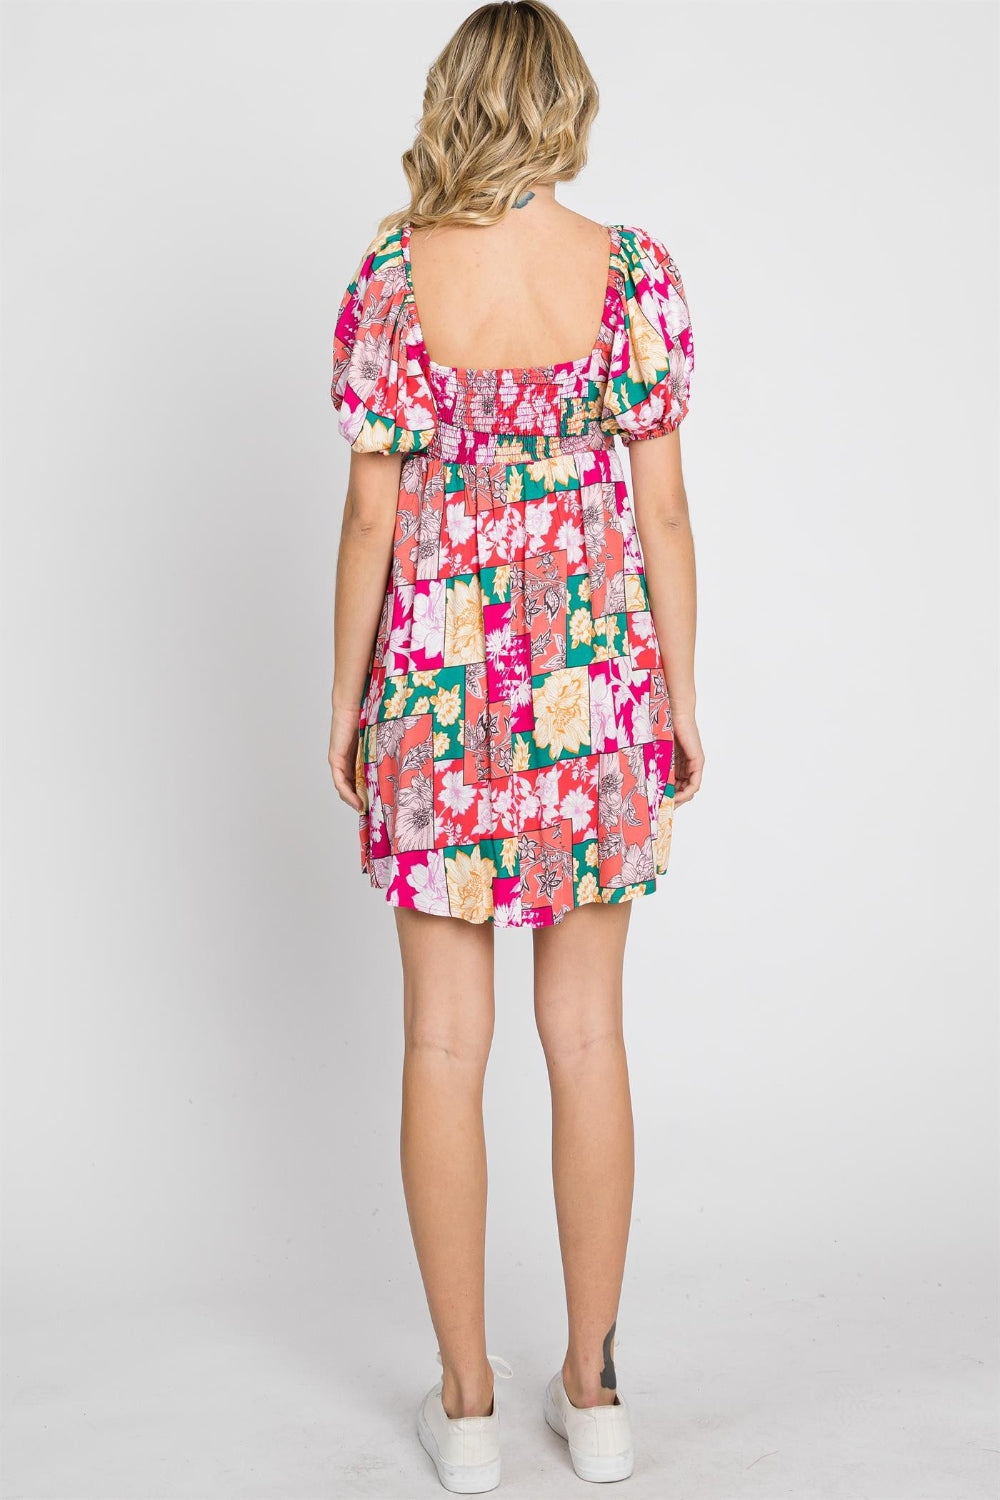 Quilted Floral Mini Dress - Cheeky Chic Boutique